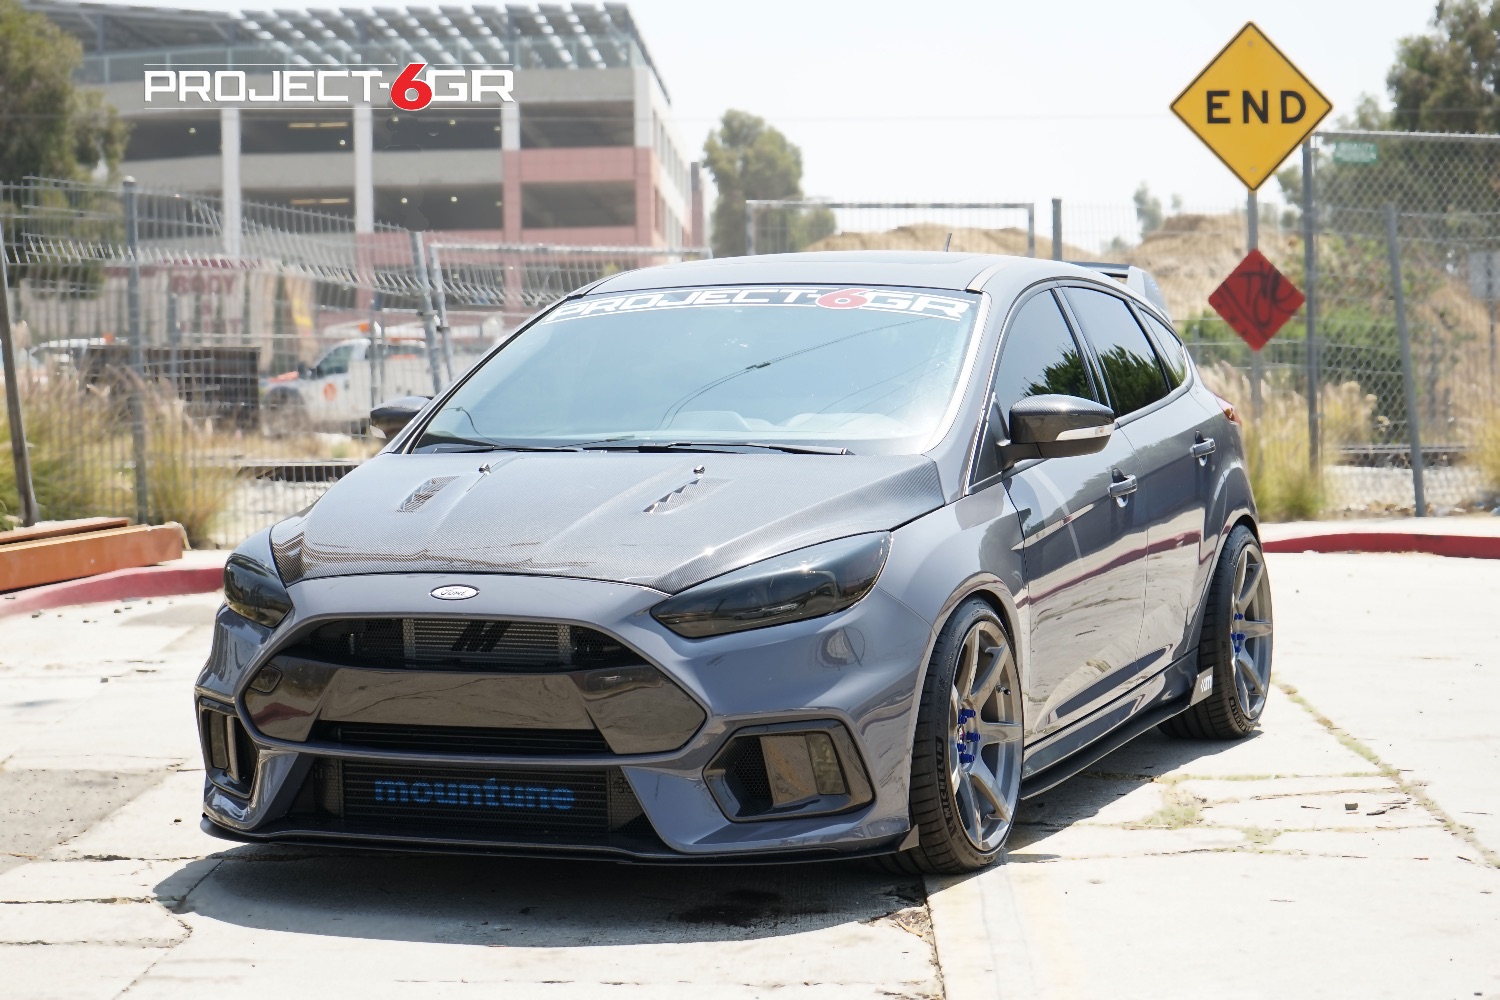 project-6gr-wheelsbrushed-titanium-ford-focus-rs-19x95-19x10-04_35250621130_o